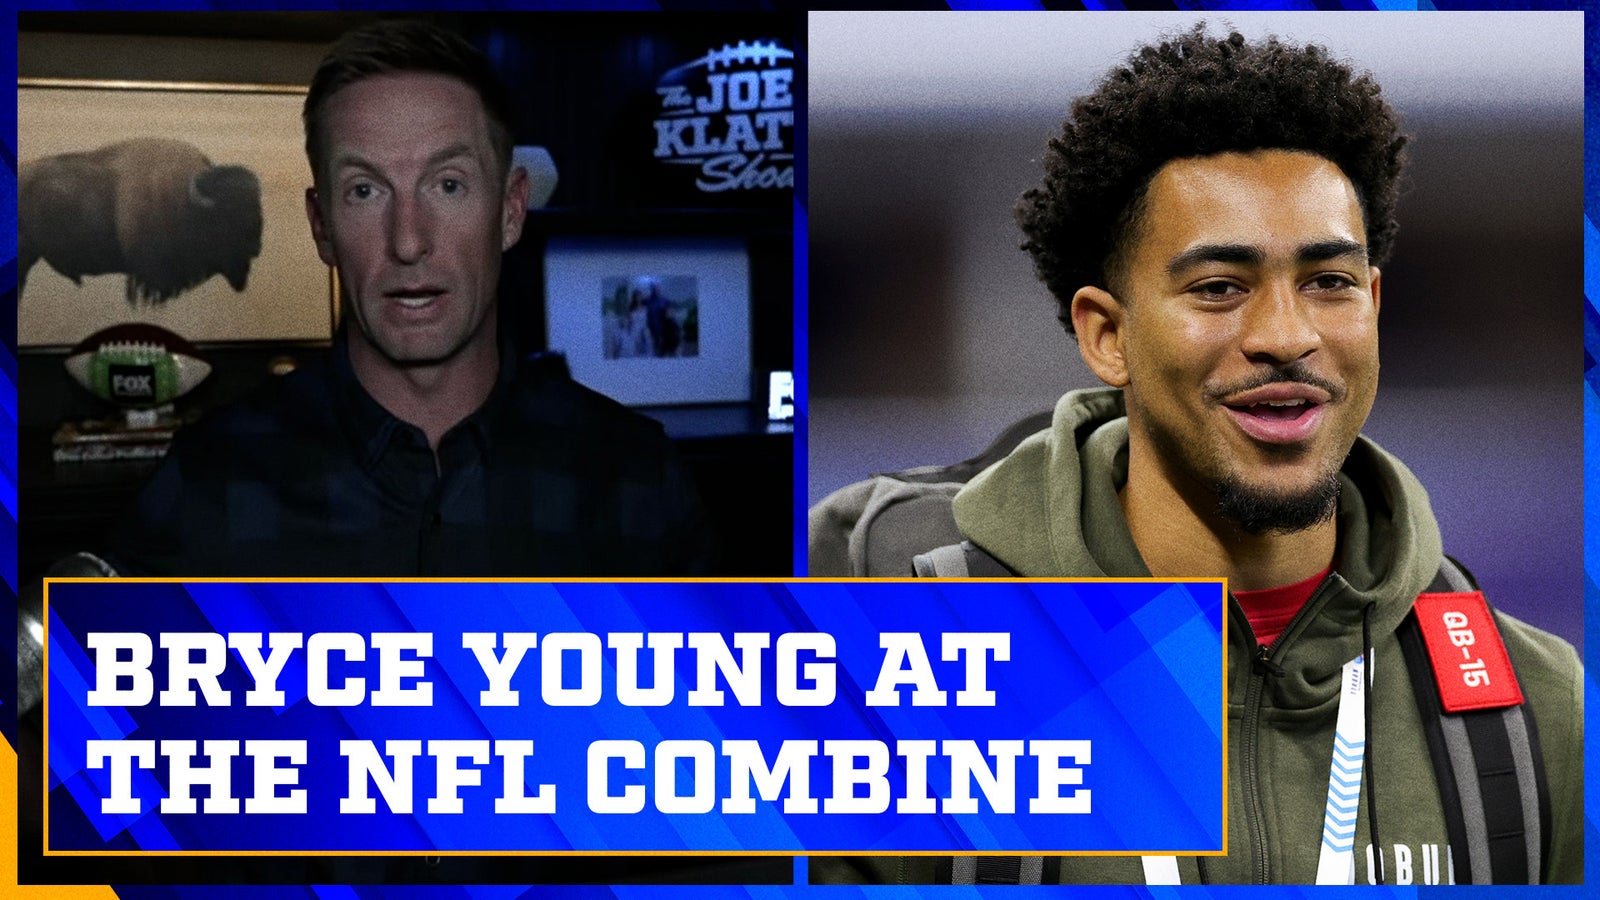 Where does Bryce Young deserve to be drafted?